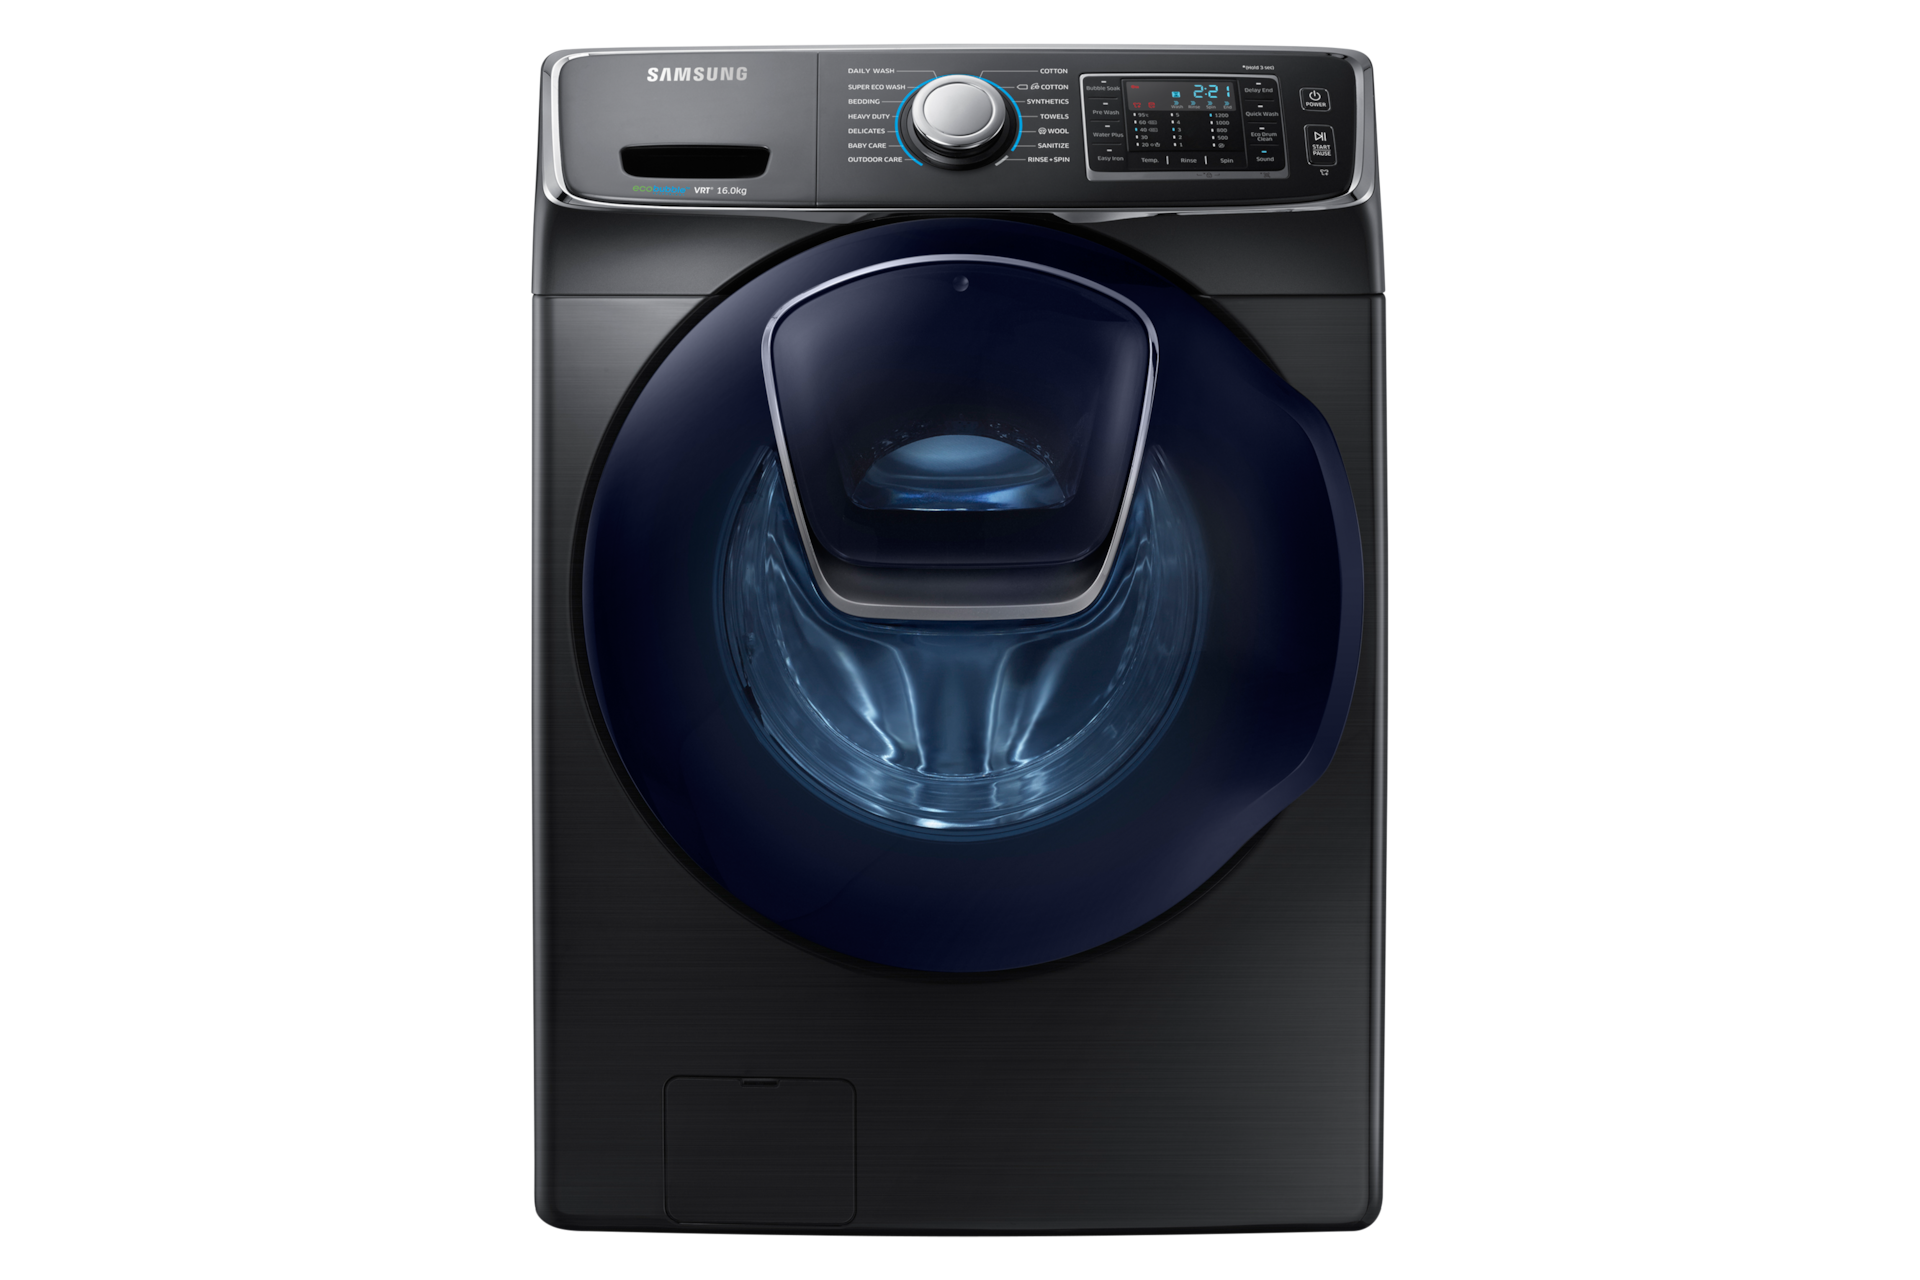 How do I use the dryer on my Samsung washer dryer?